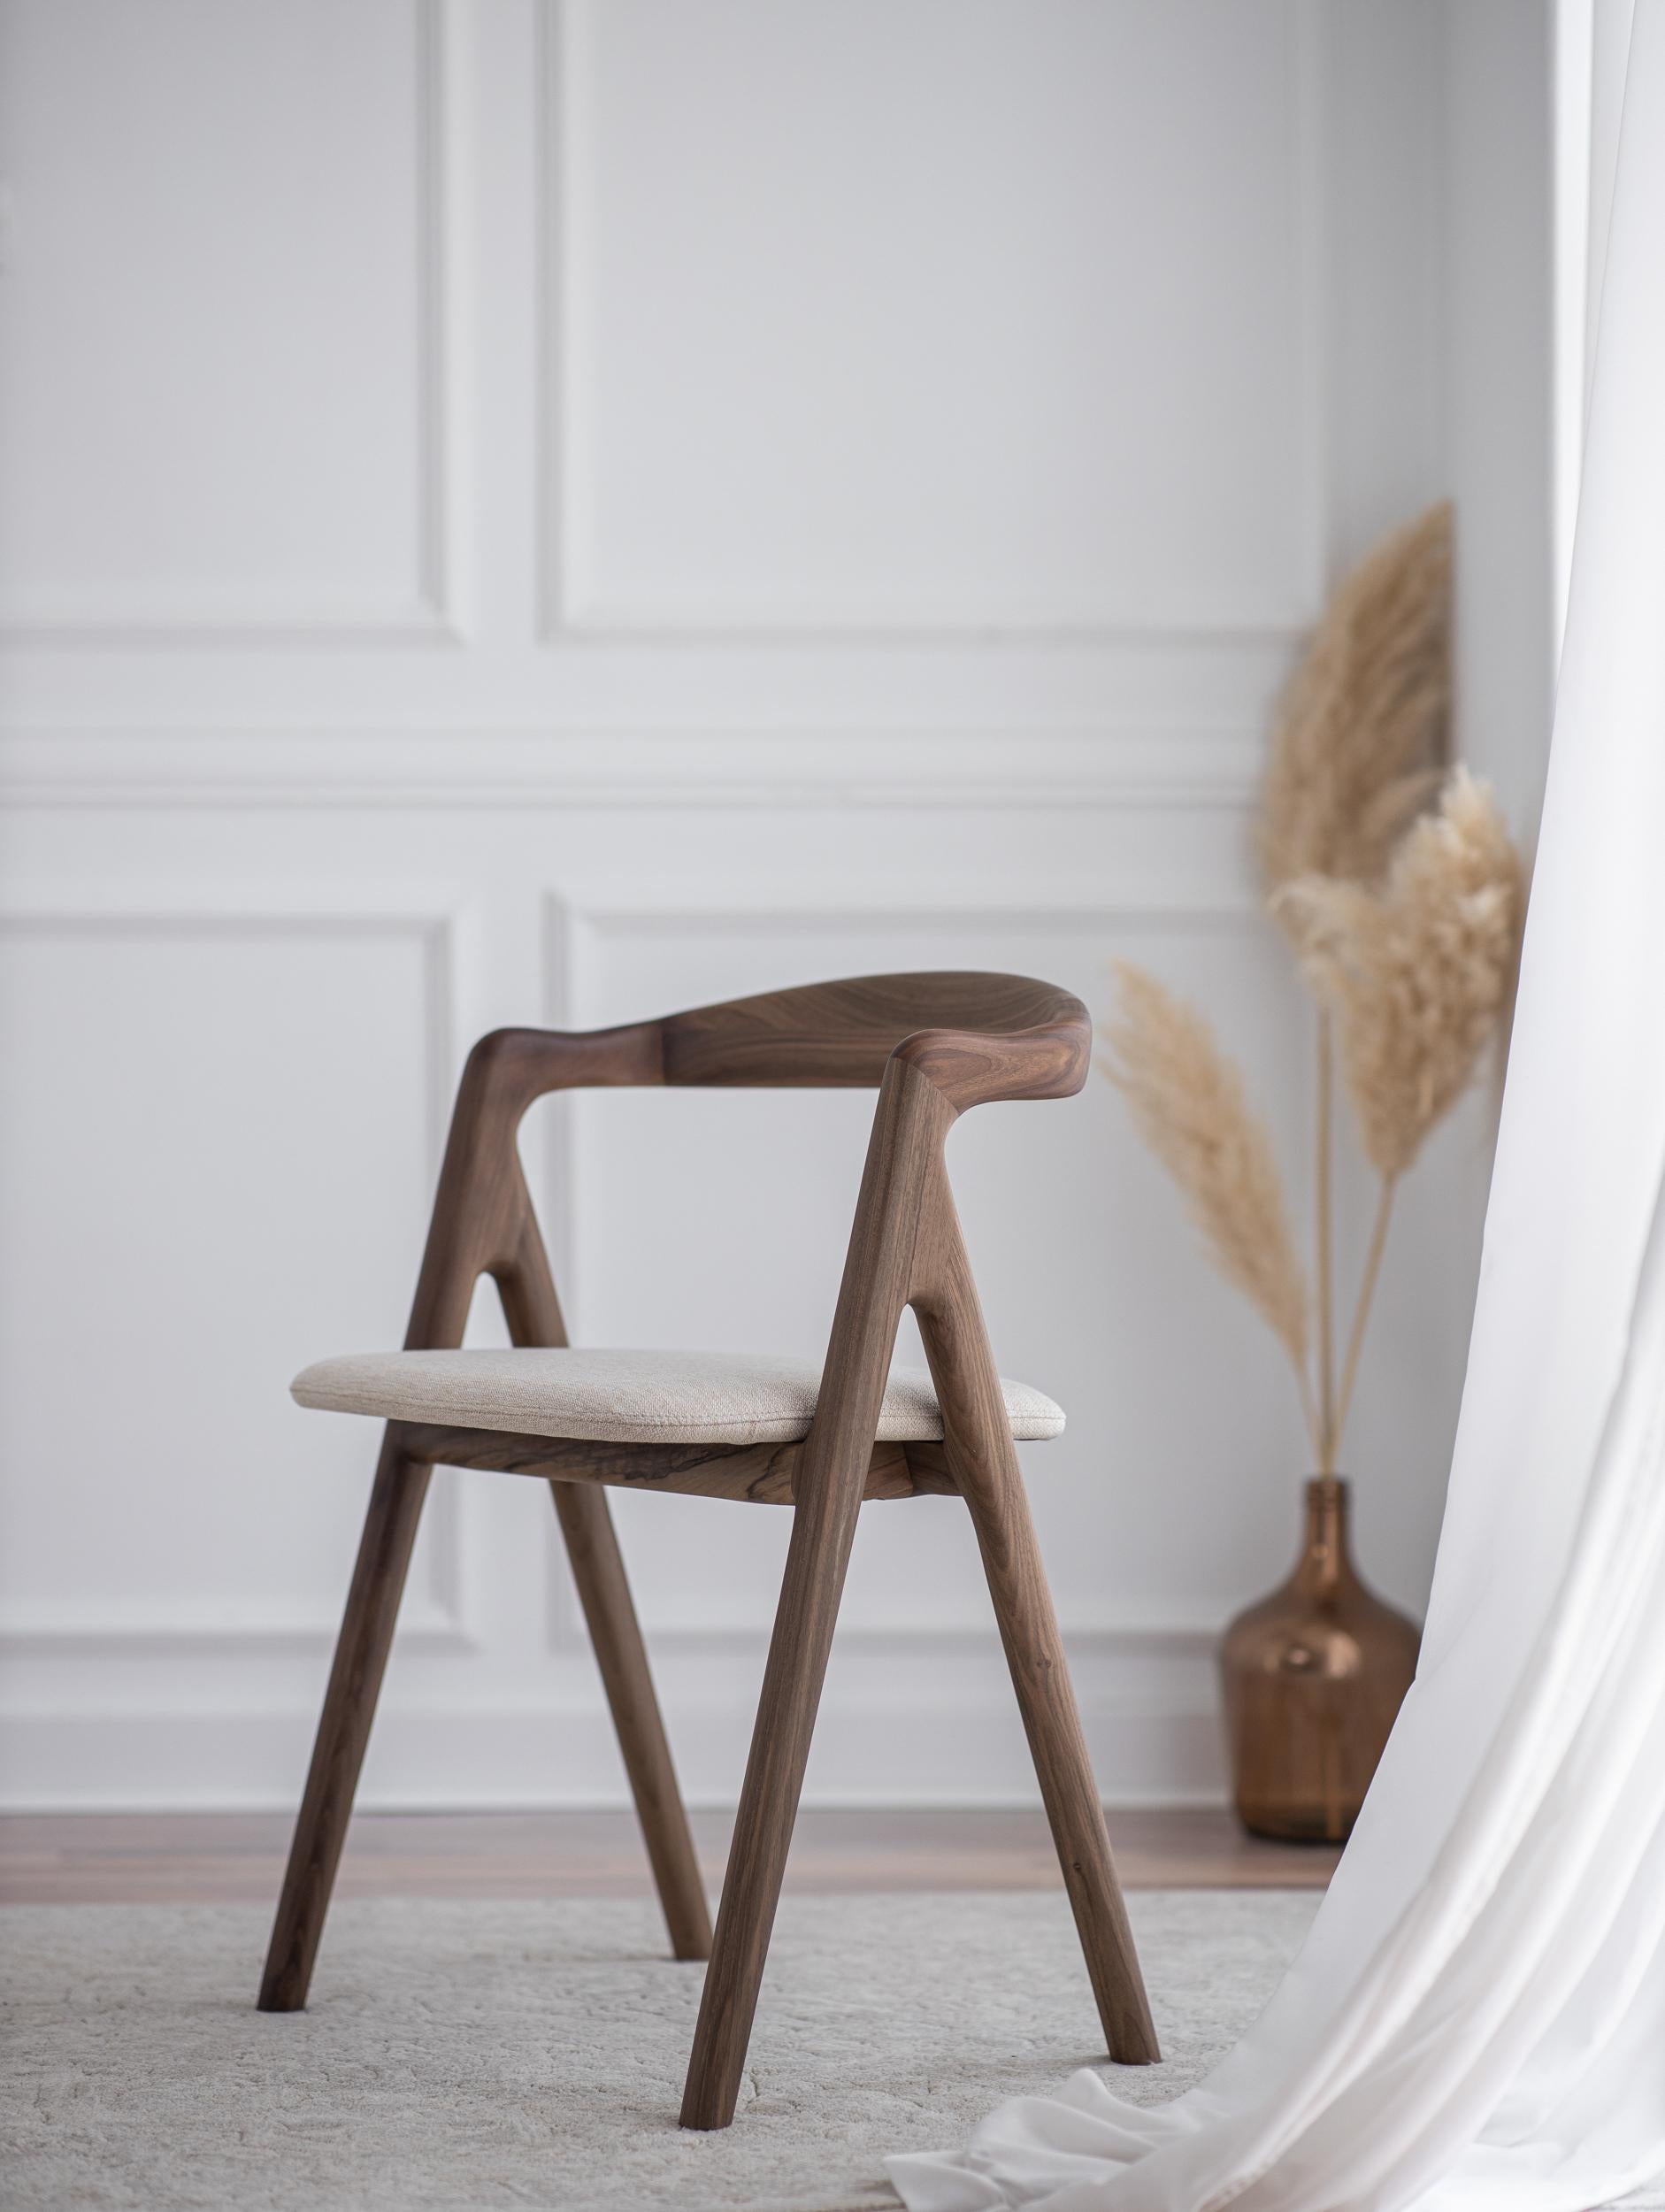 Garibaldi chair is a handmade chair made of solid, high-quality walnut wood.
For its production, we use only carefully selected wood pieces.

The chair was designed by a French architect Charlie Pommier in Paris (France).

Important note: As our